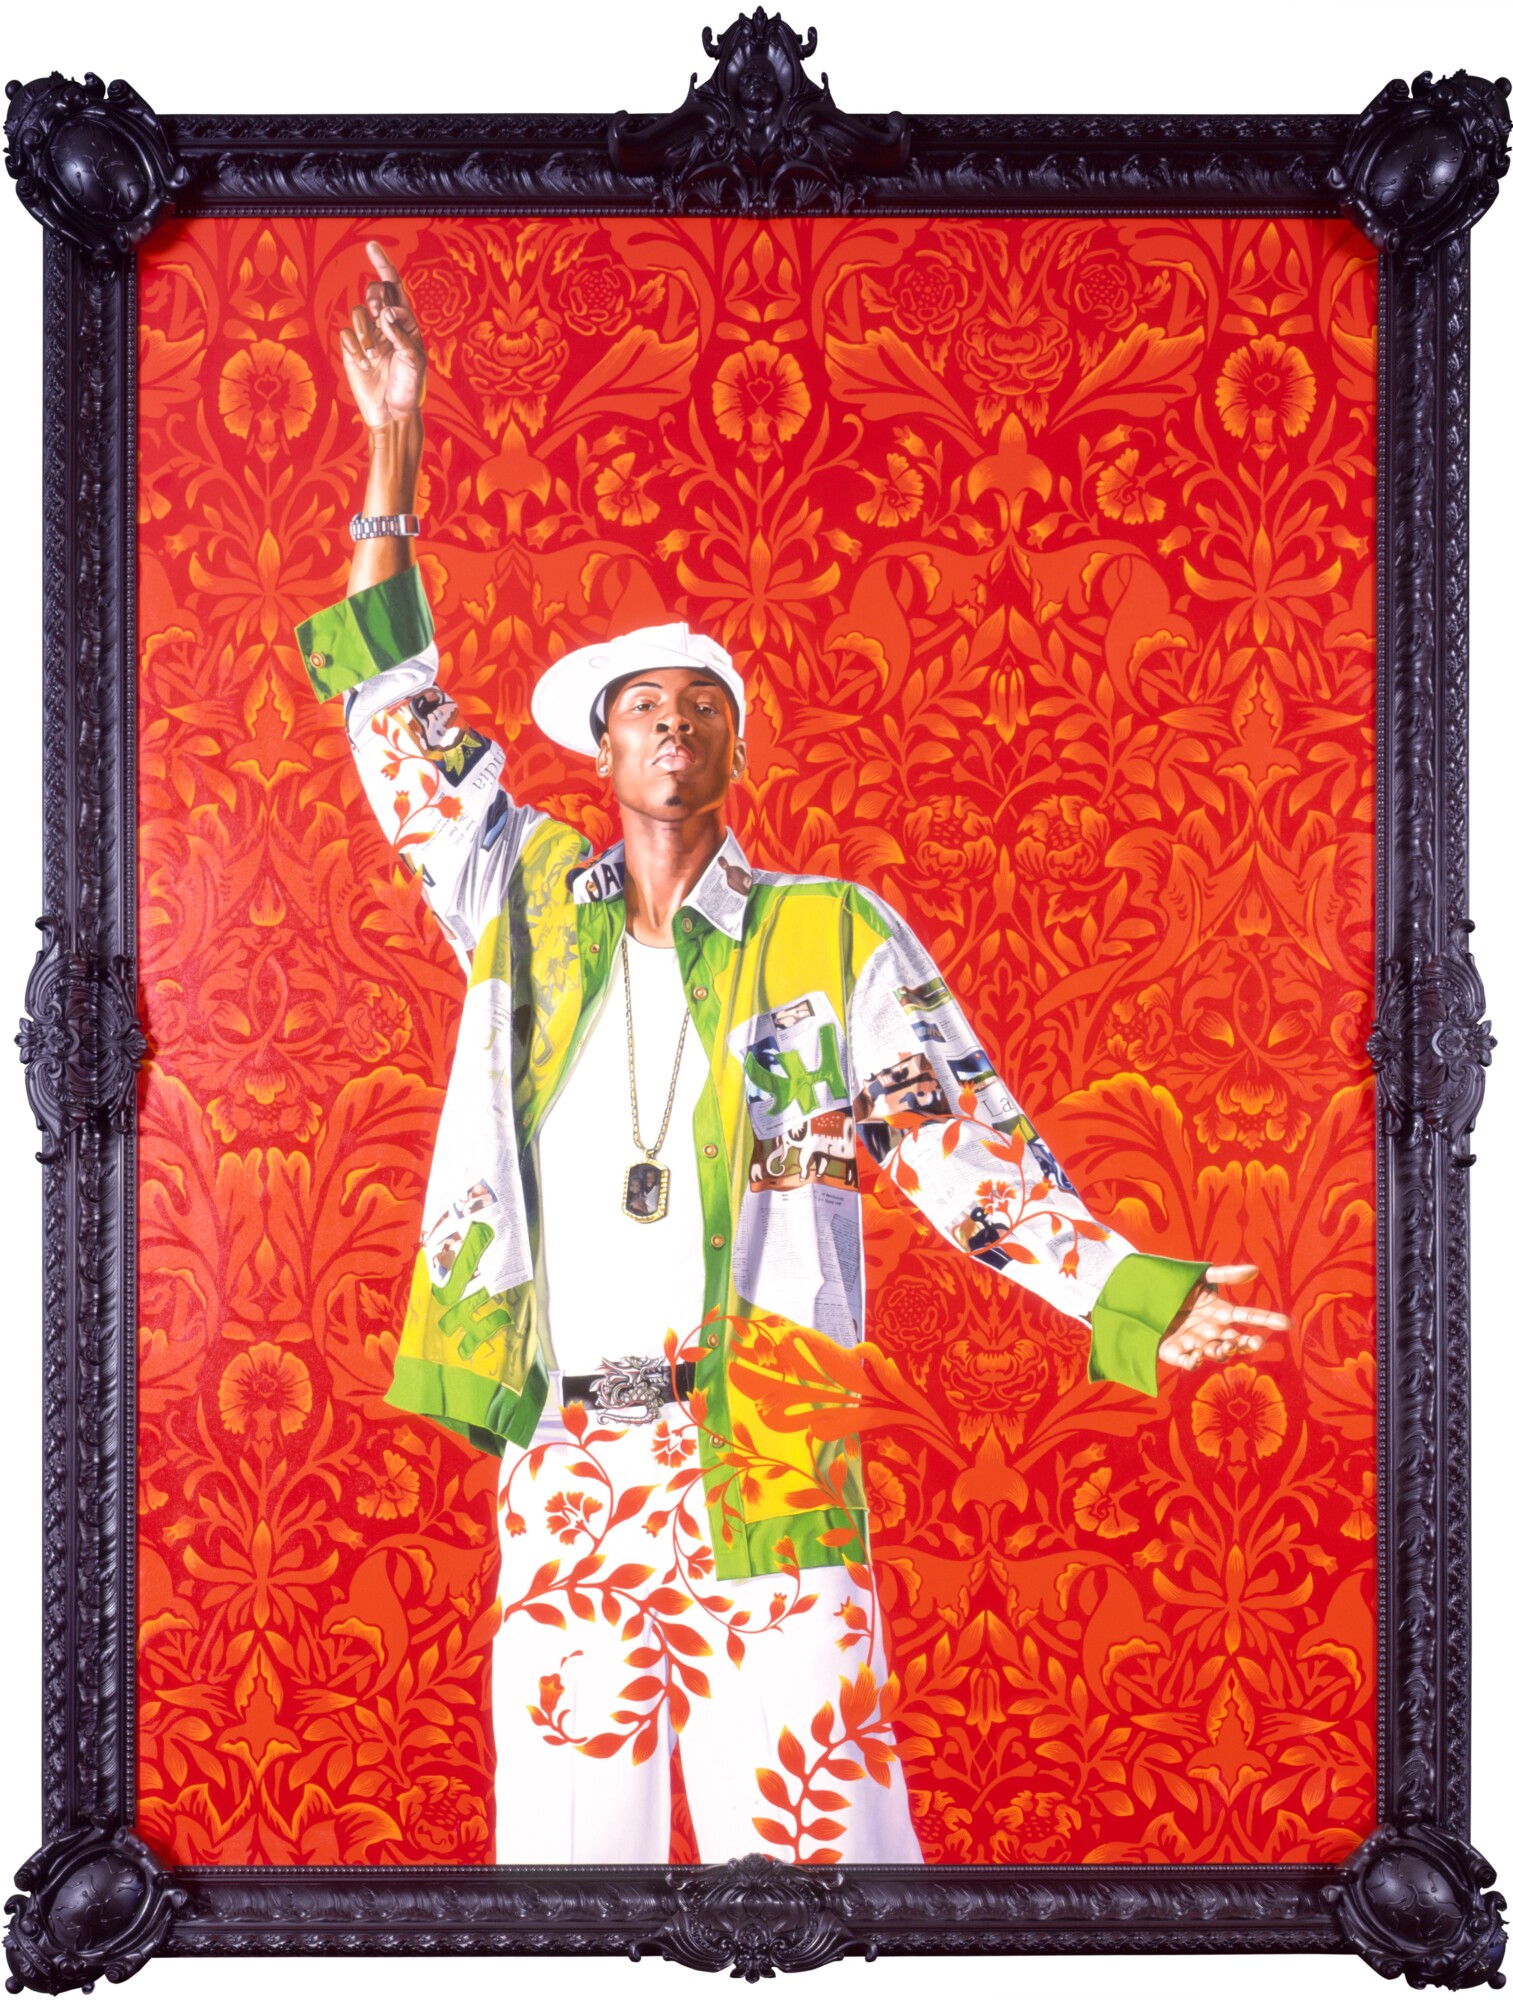 kehindewiley_columbus_The_Prophet_and_the_King